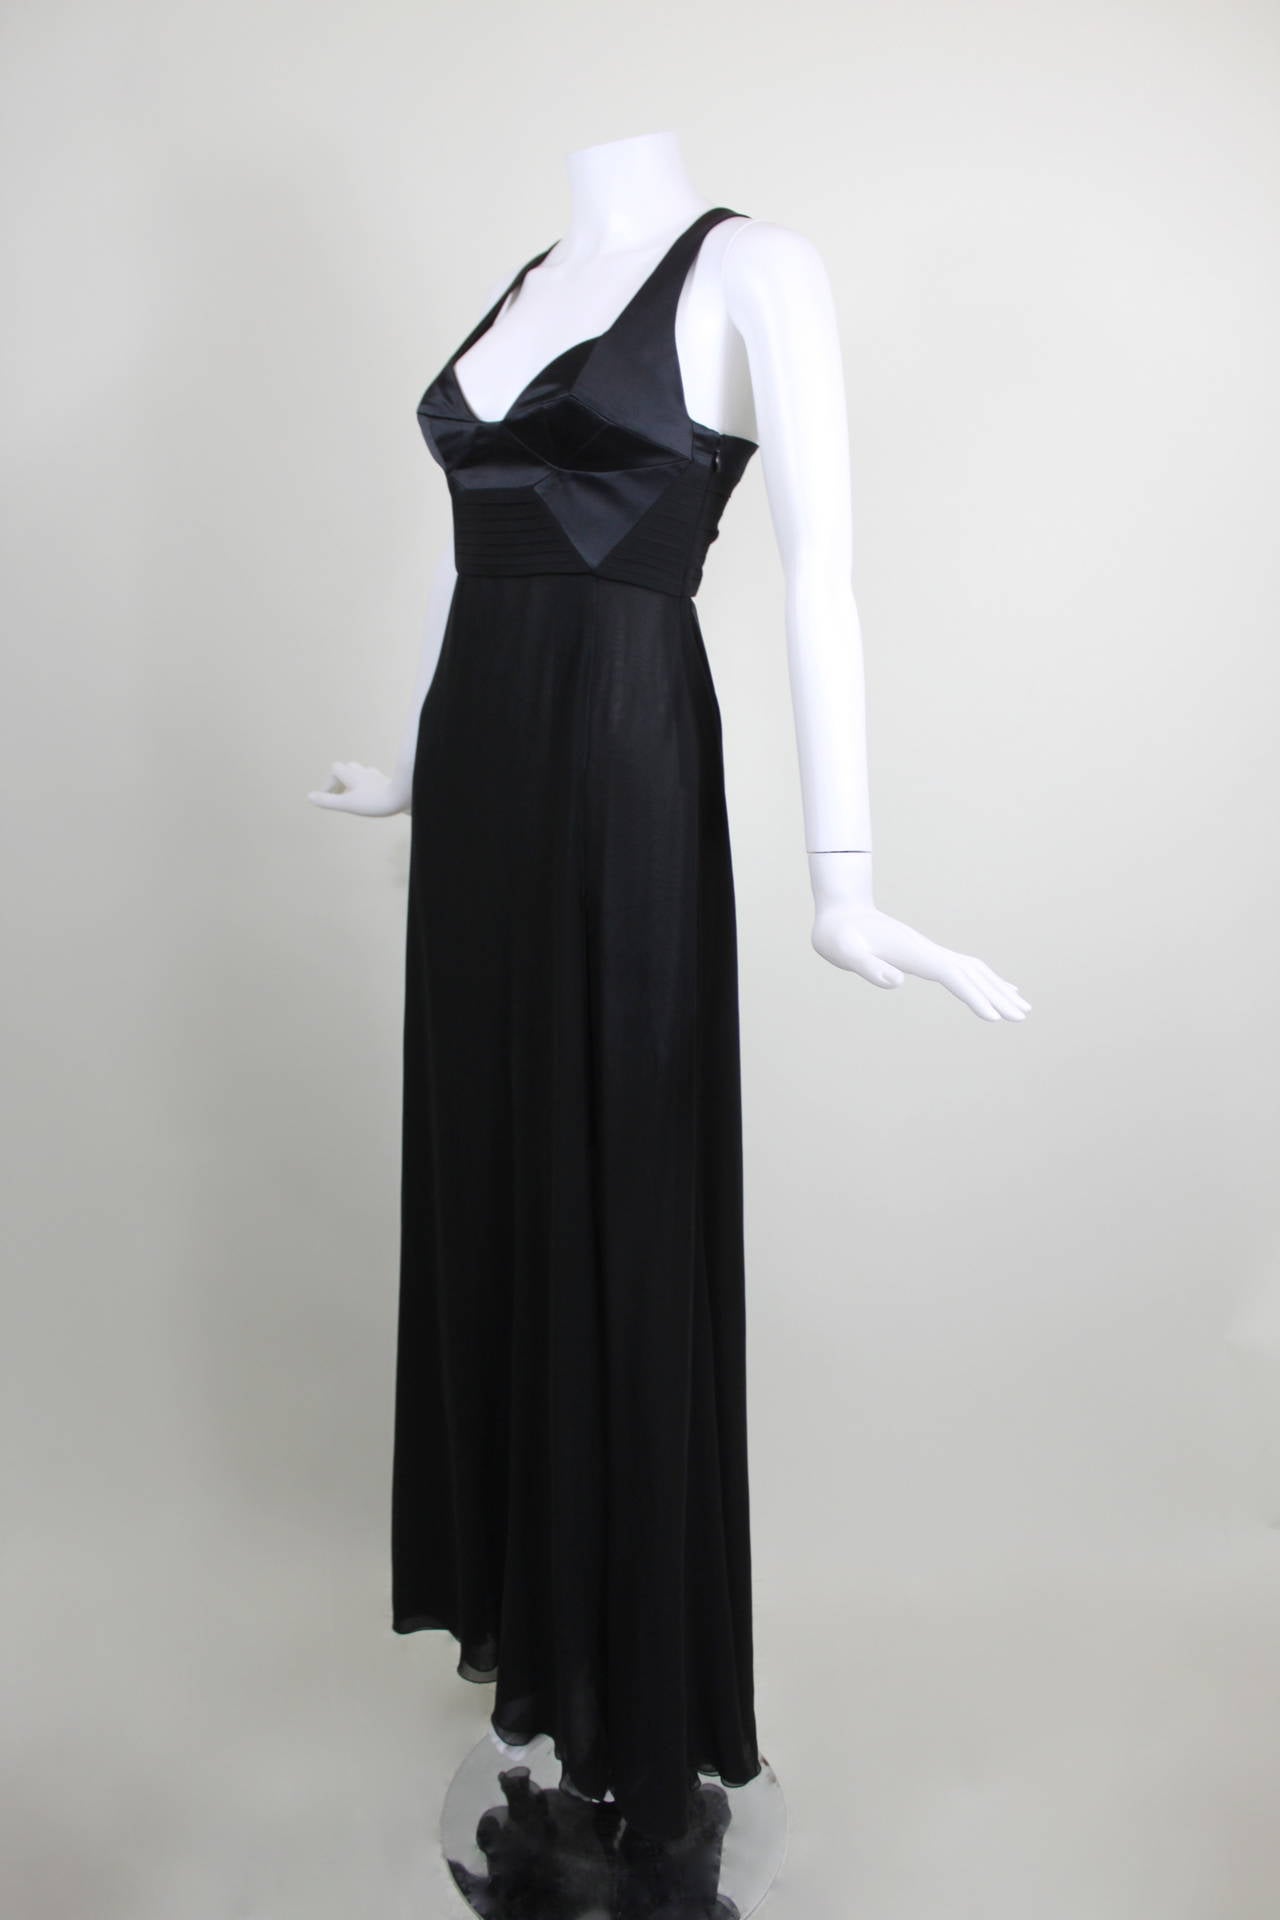 Versace Black Satin and Chiffon Evening Gown 1